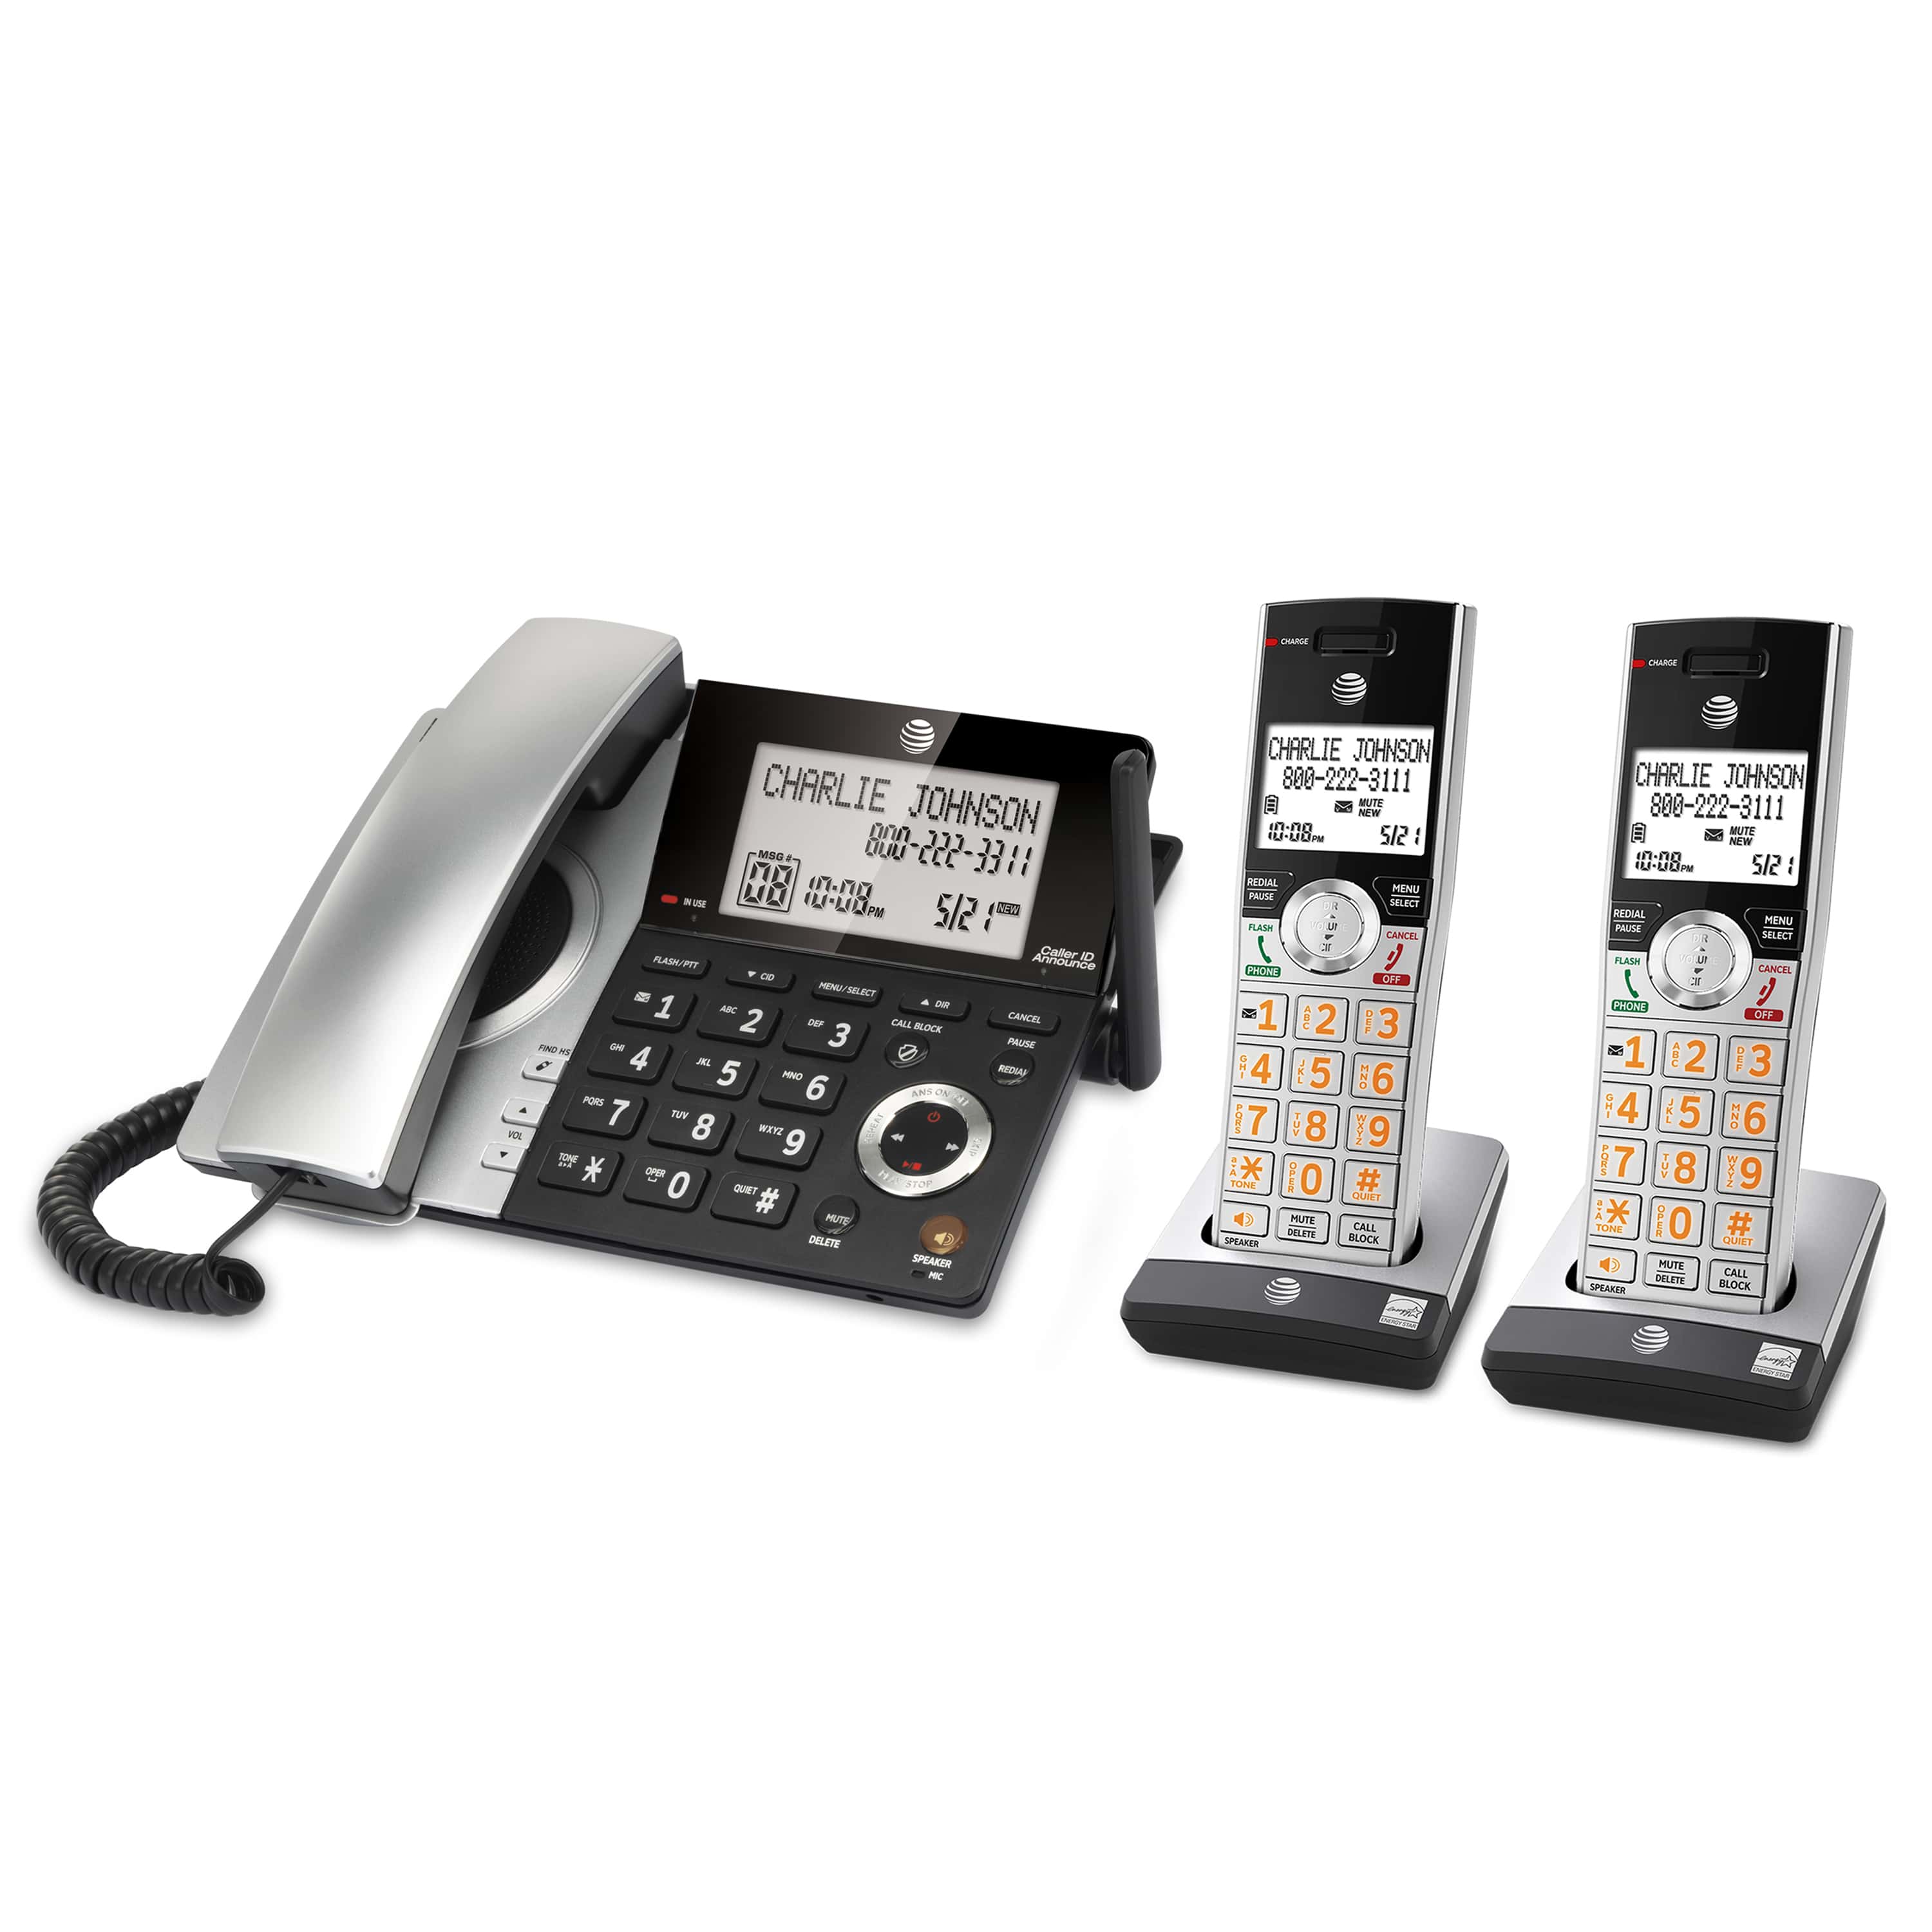 2 handset corded/cordless phone system with smart call blocker - view 14